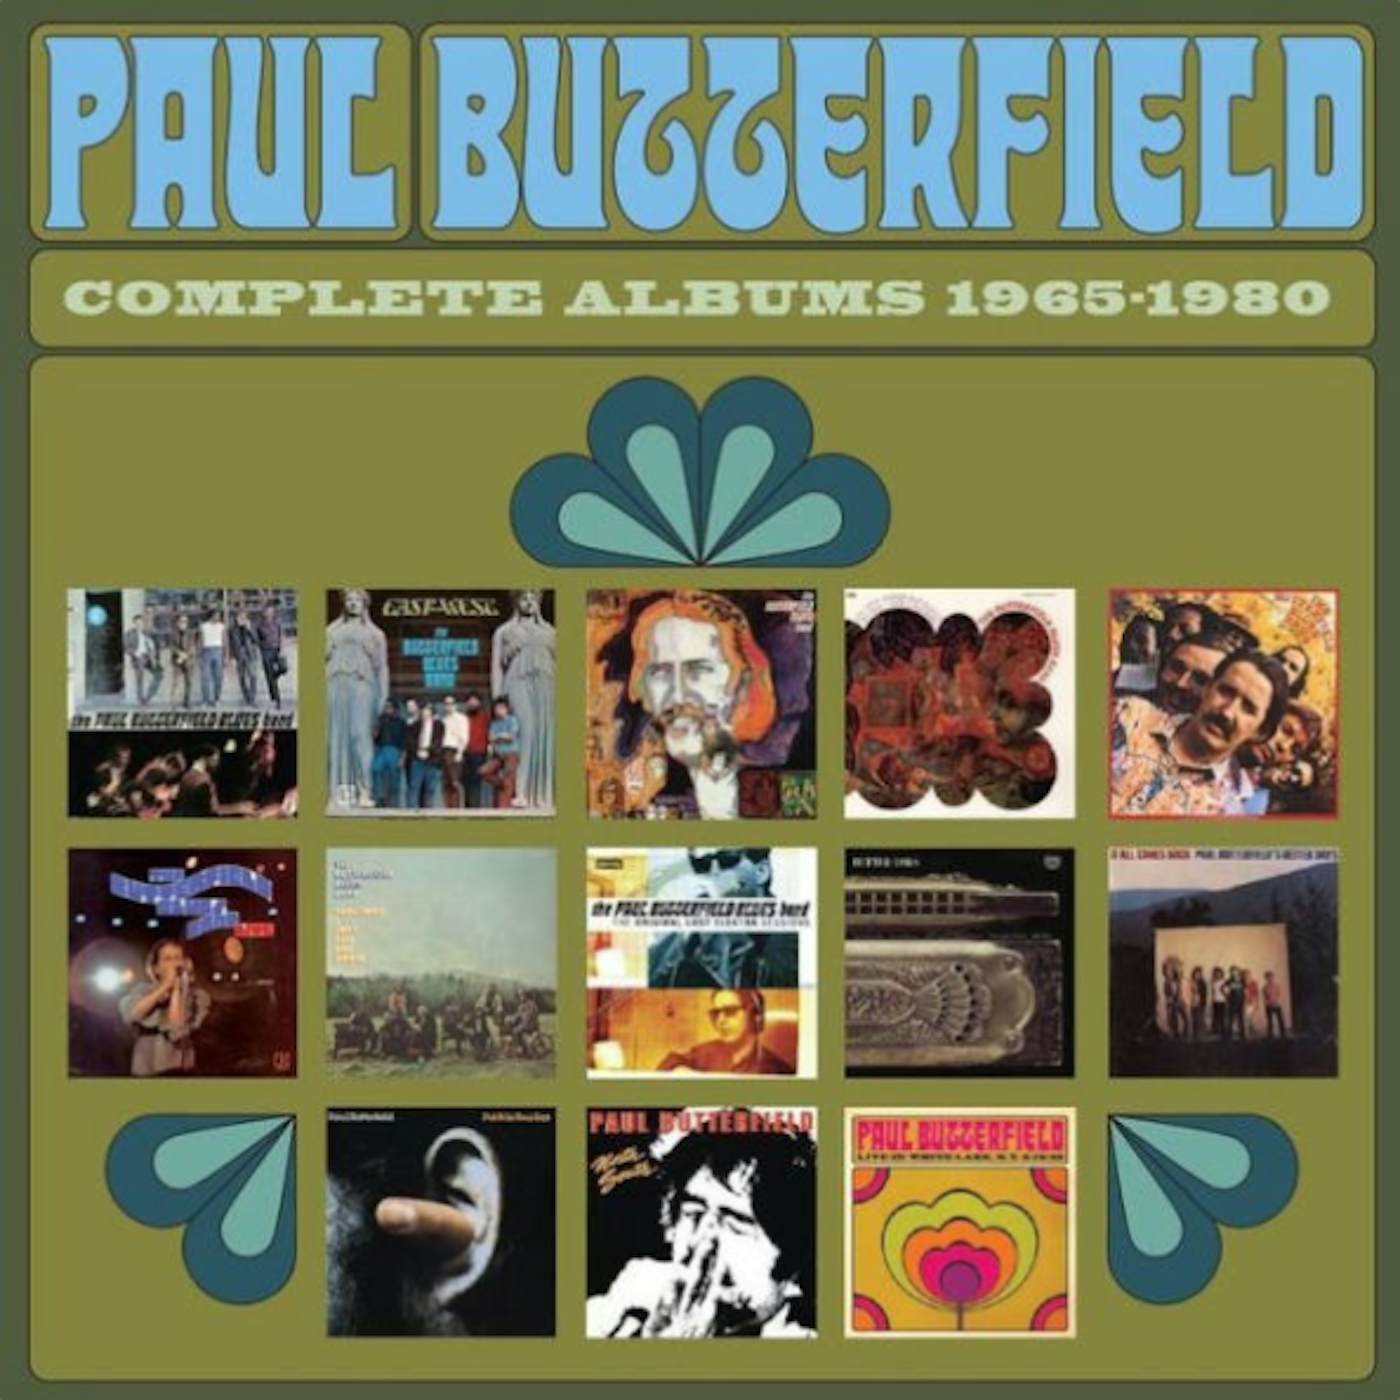 Paul Butterfield Complete Albums: 1965-1980 (14CD)